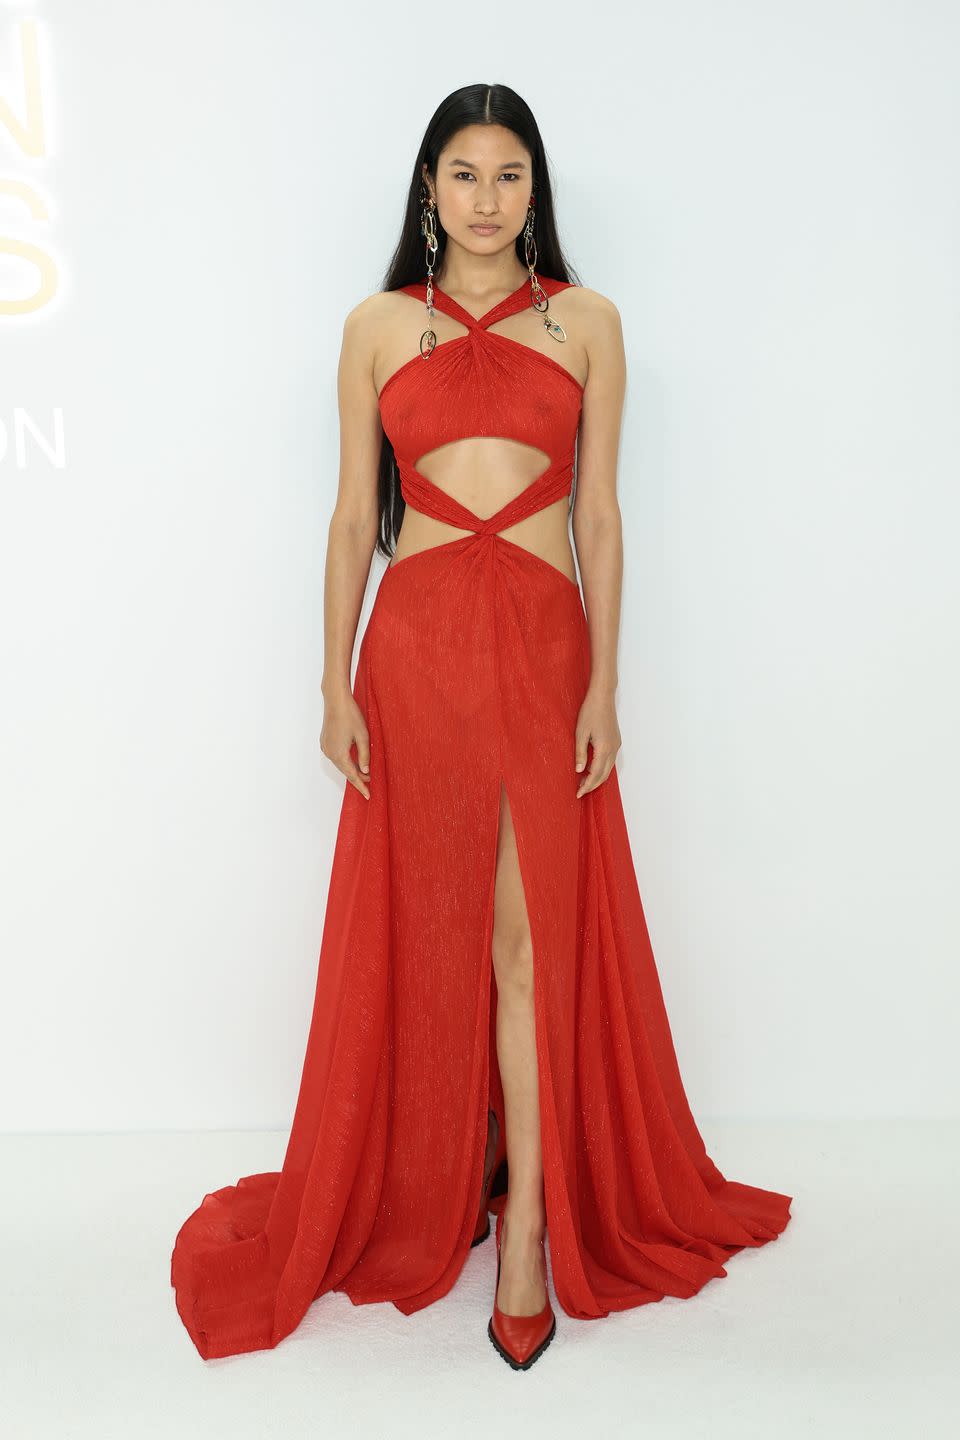 The Best Red Carpet Looks From the "Oscars of Fashion"